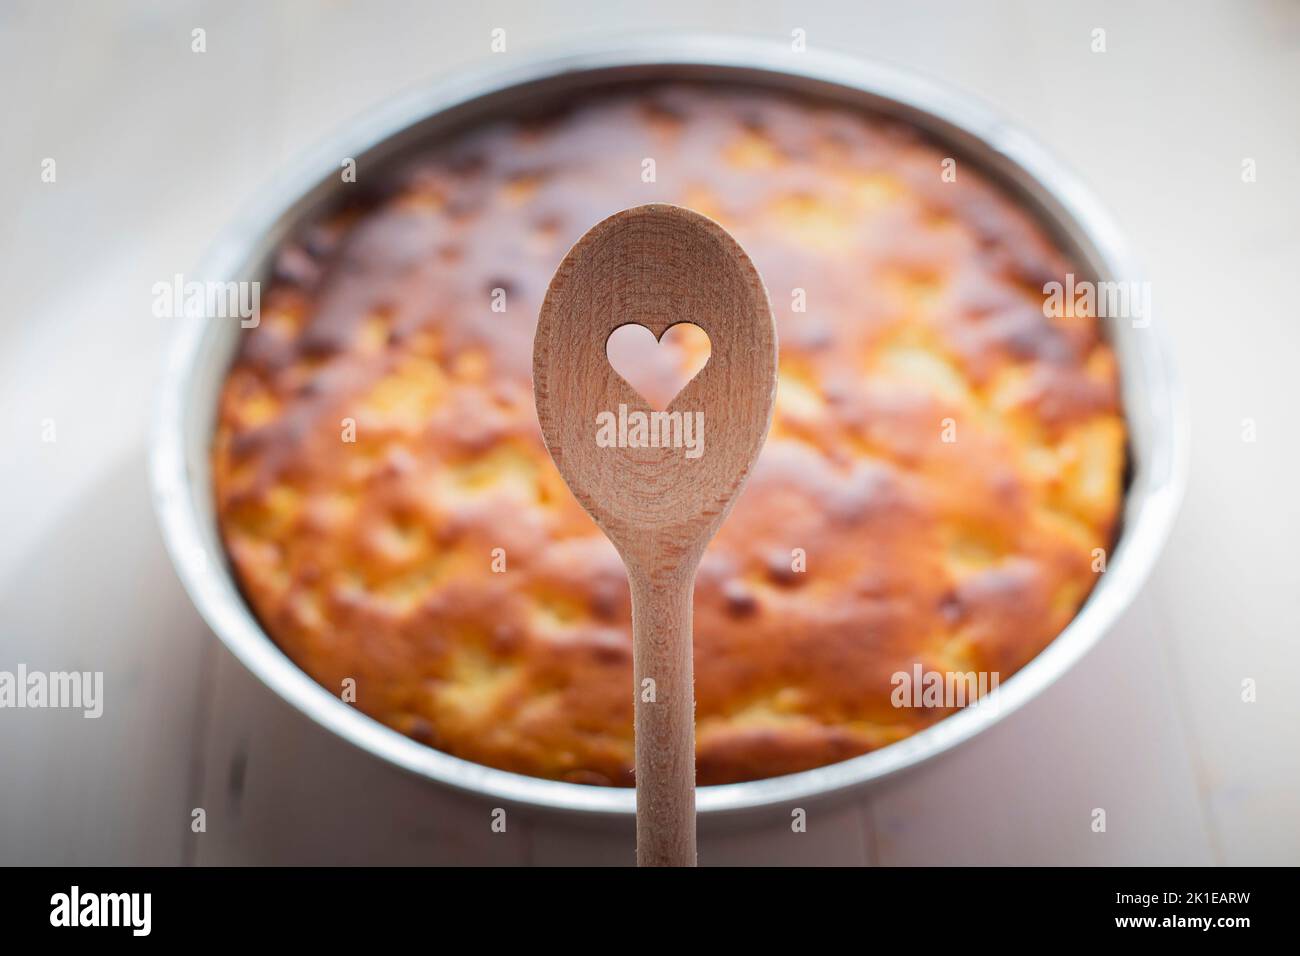 Wooden spoon with heart shaped hole, and pie in the background on white table. Baked with love concept. Stock Photo